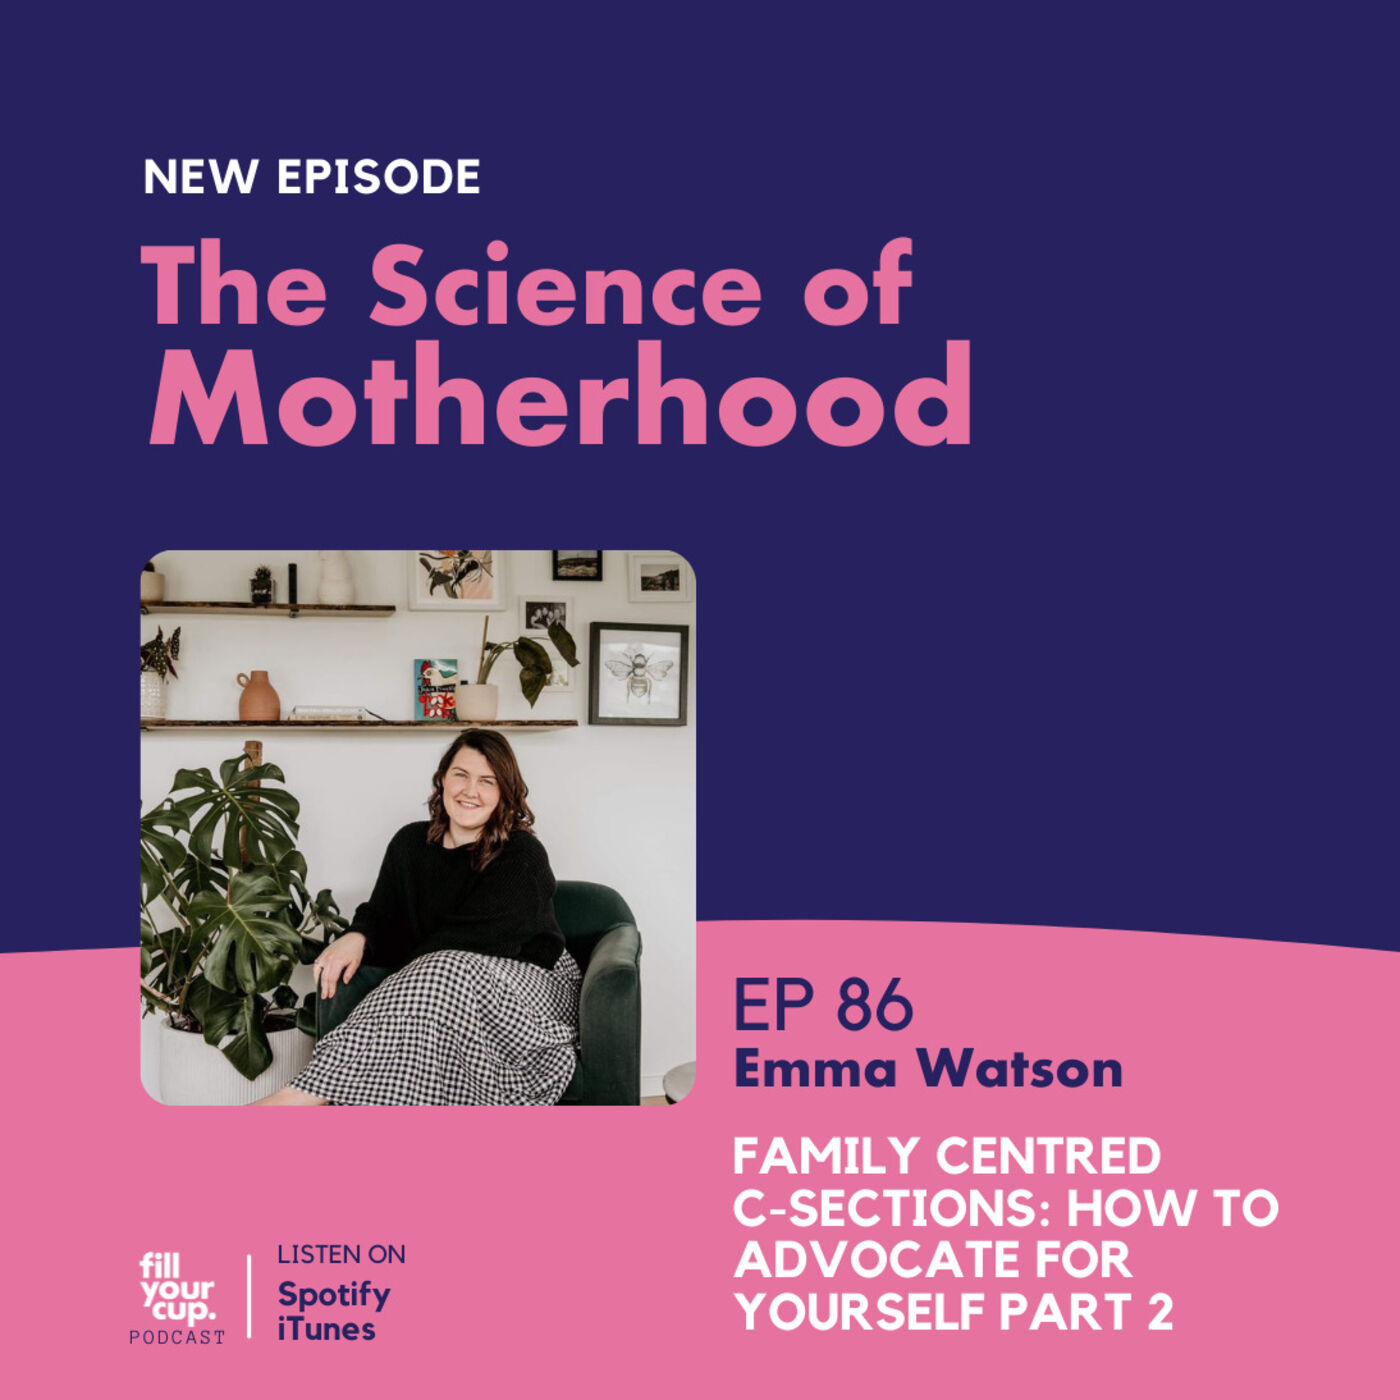 Ep 86. Emma Watson - Family Centred C-sections: How to Advocate for Yourself Part 2